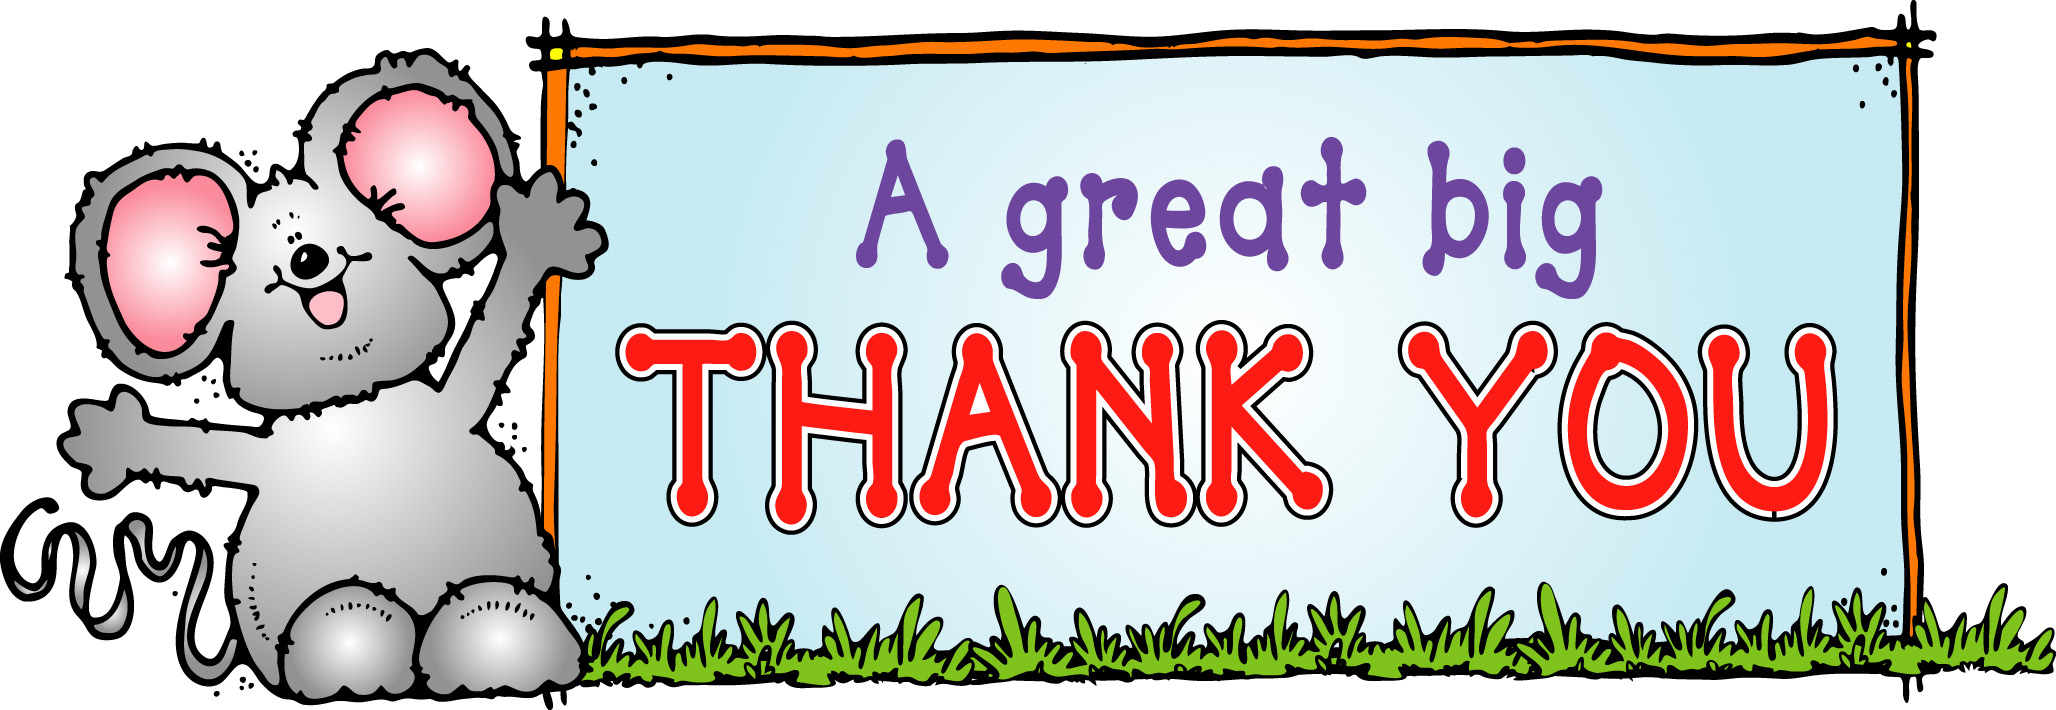 Funny thank you images free clipart free clip art images image 7 4